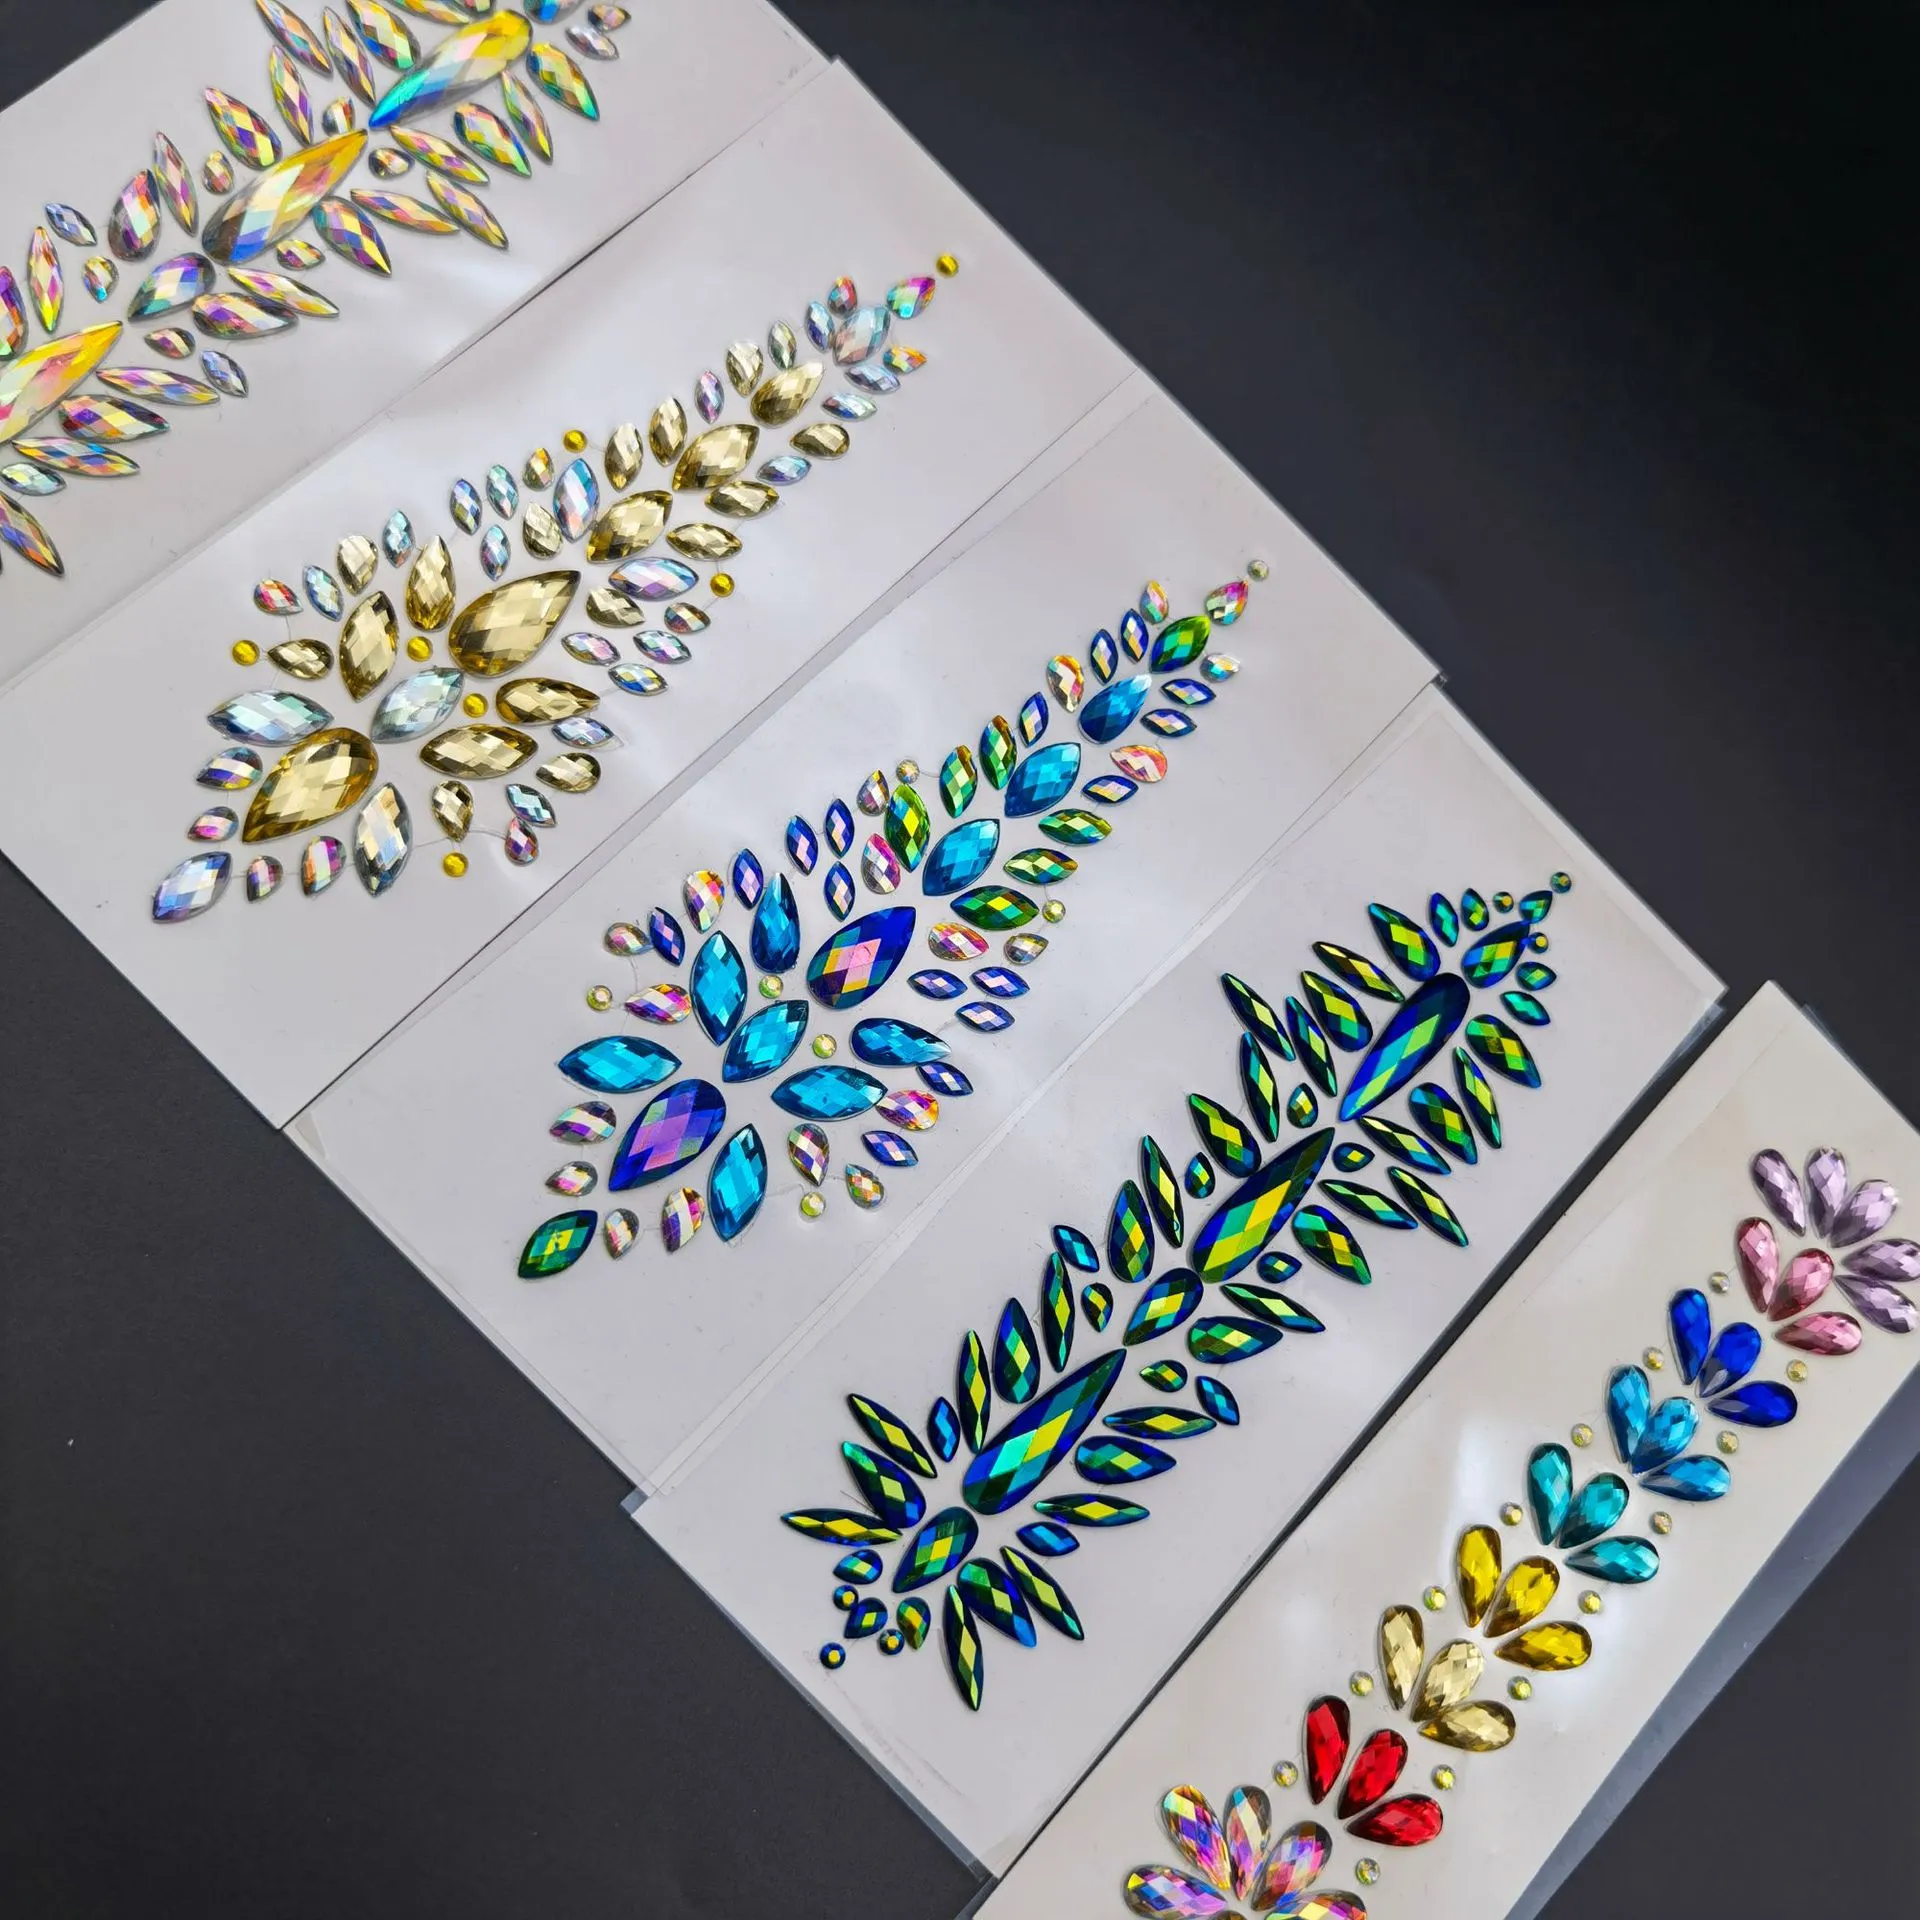 3D Crystal Resin Drill Stickers For EDM Music Festival, Fashionable Face  Accessory, Forehead Stage Decor, And Temporary Hair Tattoo Sticker From  My_story, $1.11